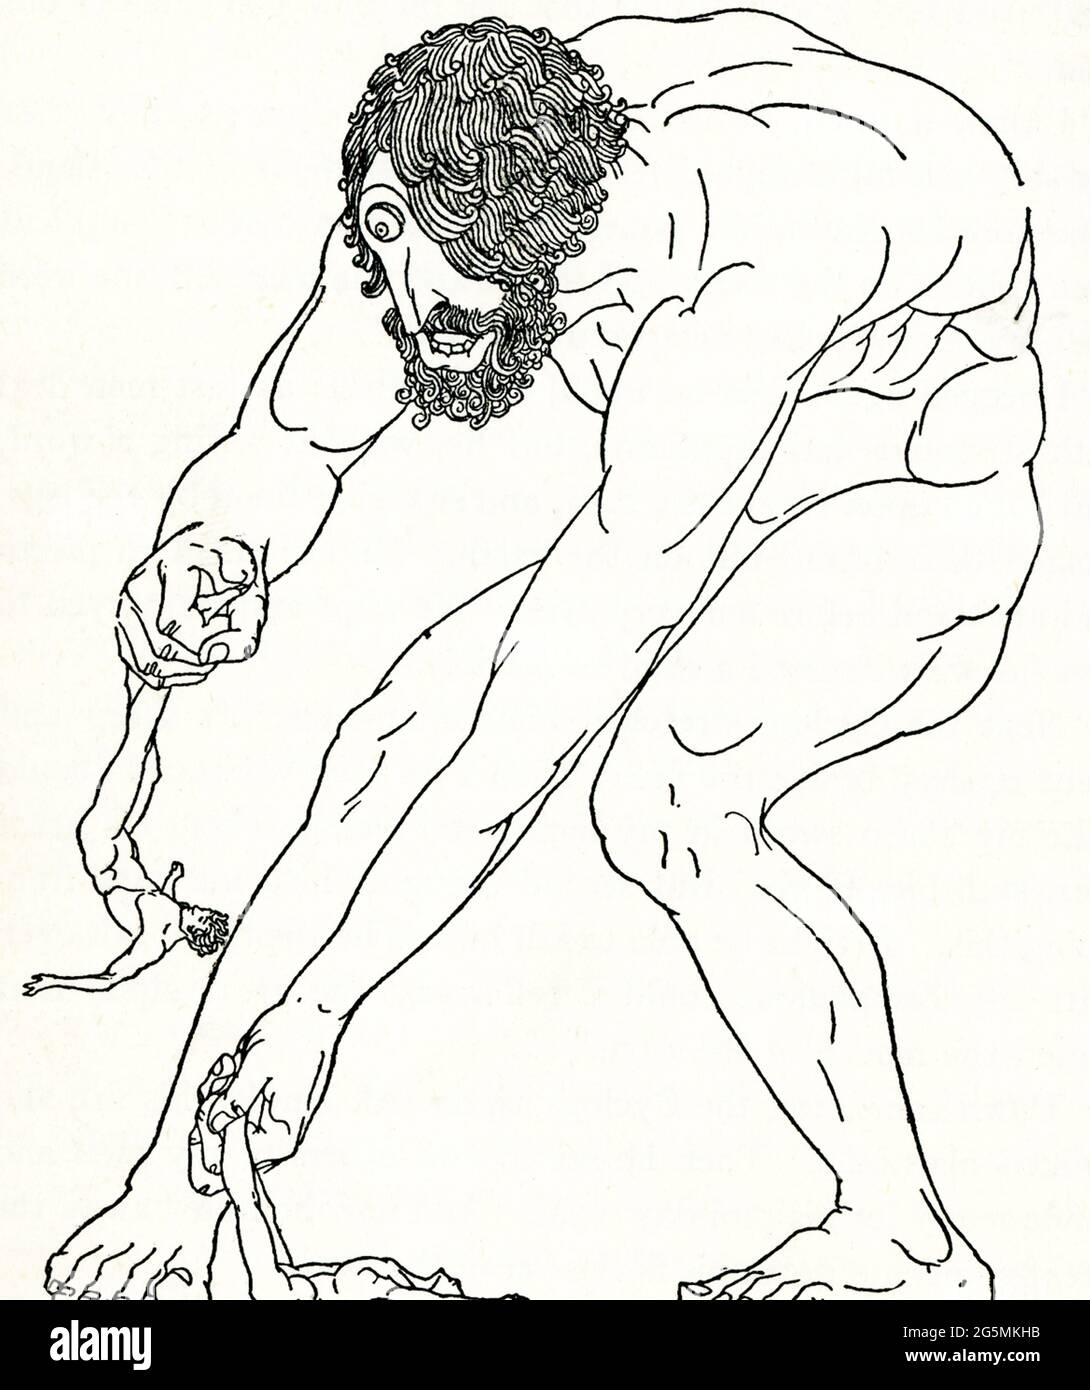 This 1918 image illustrates the Cyclops named Polyphemus preparuing to eat two of Odysseus’s men. In the epic poem Odyssey, which is credited to the Greek poet Homer, the hero Odysseus (also spelled Ulysses) and his men, on their way home to Ithaca from the Trojan War, are captured by Polyphemus, a Cyclops or one-eyed giant. Polyphemus eats six of the men (seen here, getting ready to eat two) and says he will eat them all. Odysseus escapes by giving the Cyclops strong wine. The Cyclops falls Stock Photo